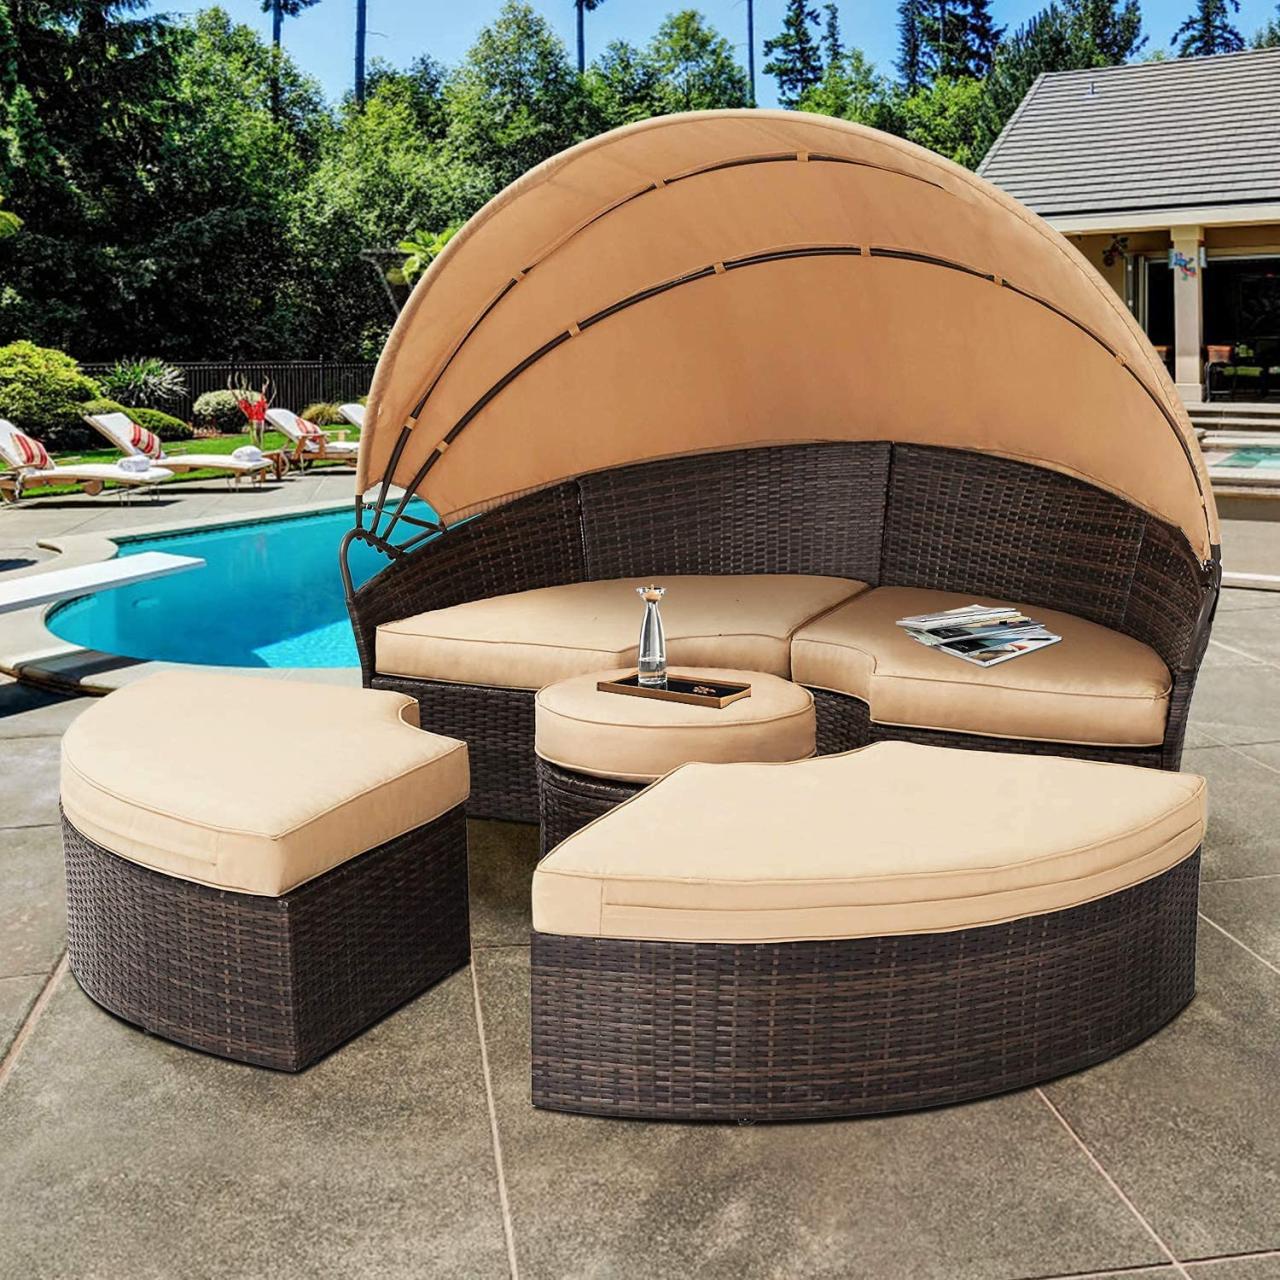 Buy SOLAURA Outdoor Round Daybed, Patio Daybed with Retractable Canopy and  Brown Wicker Patio Sectional Sofa, Seating Separates Cushioned Seats (4  Light Brown Pillow) Online in India. B07NPDW9Y6